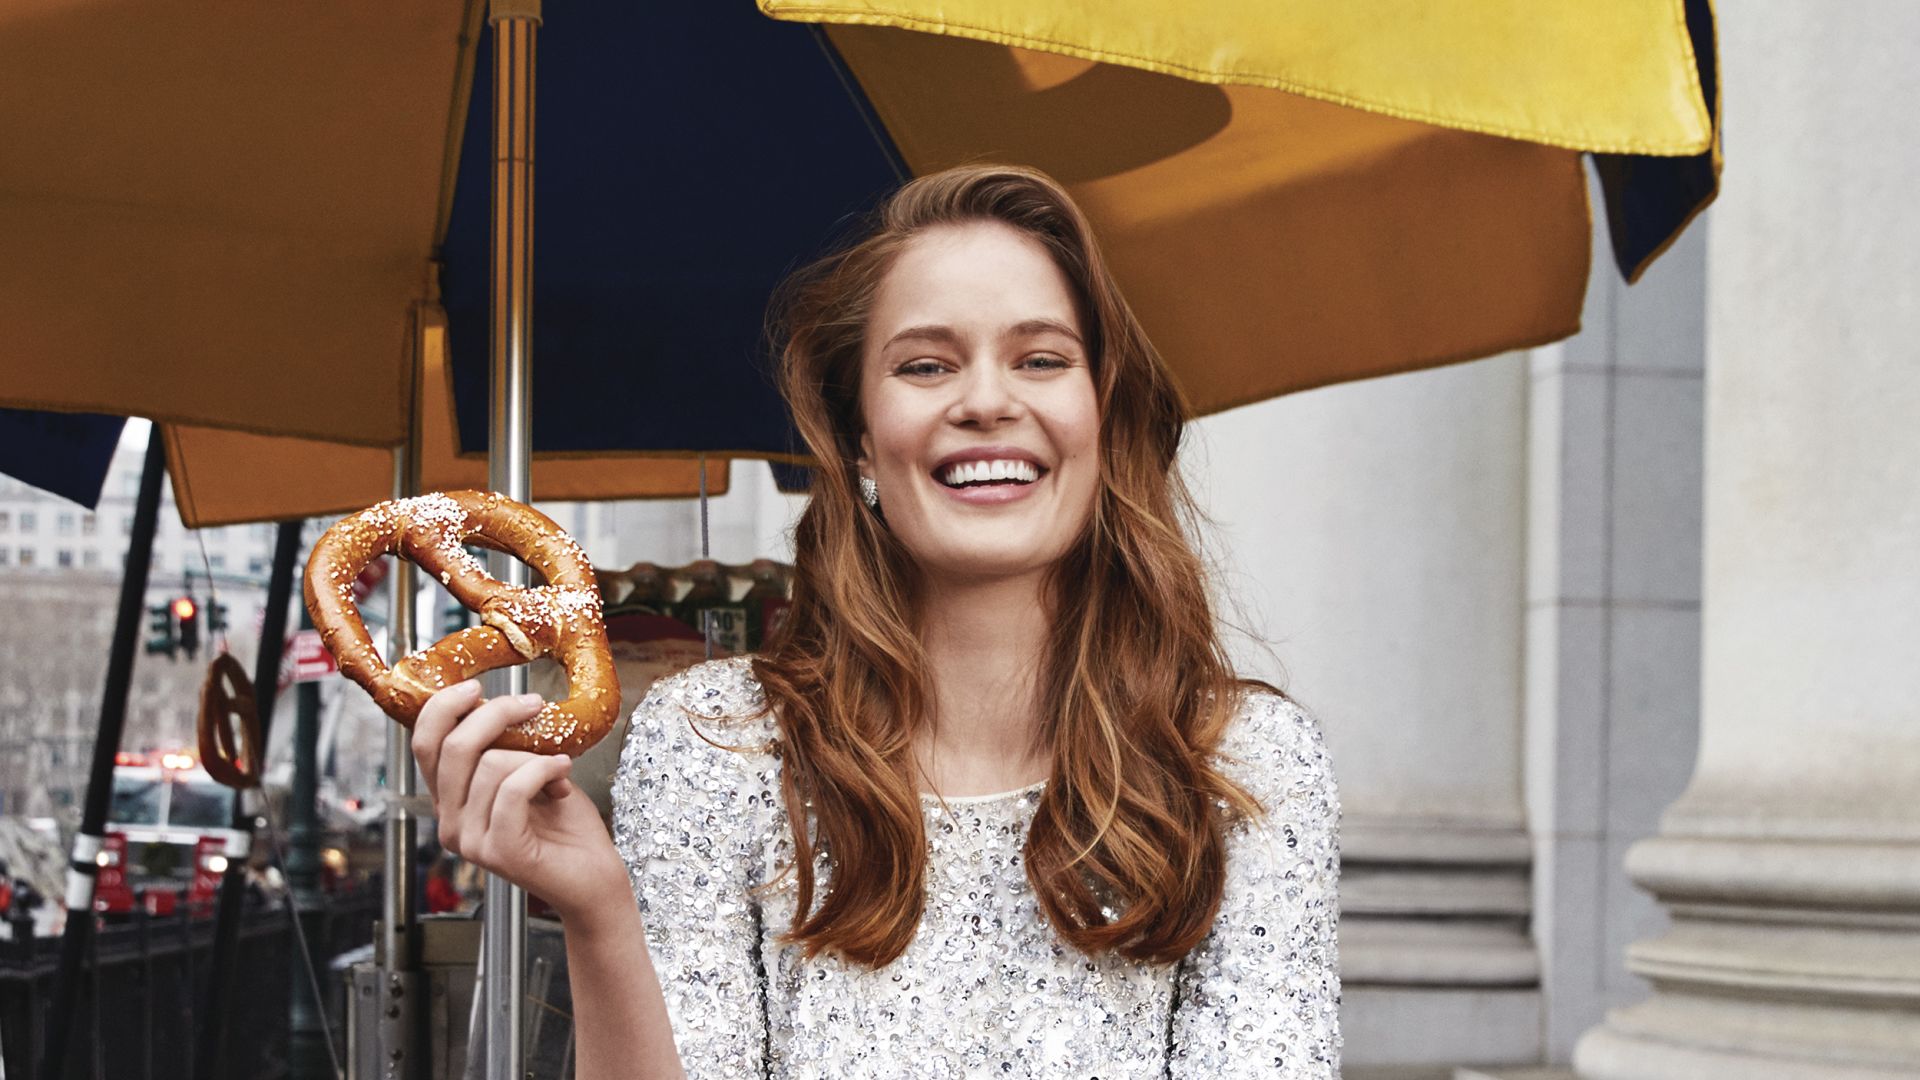 A Woman Holding An Umbrella And A Donut